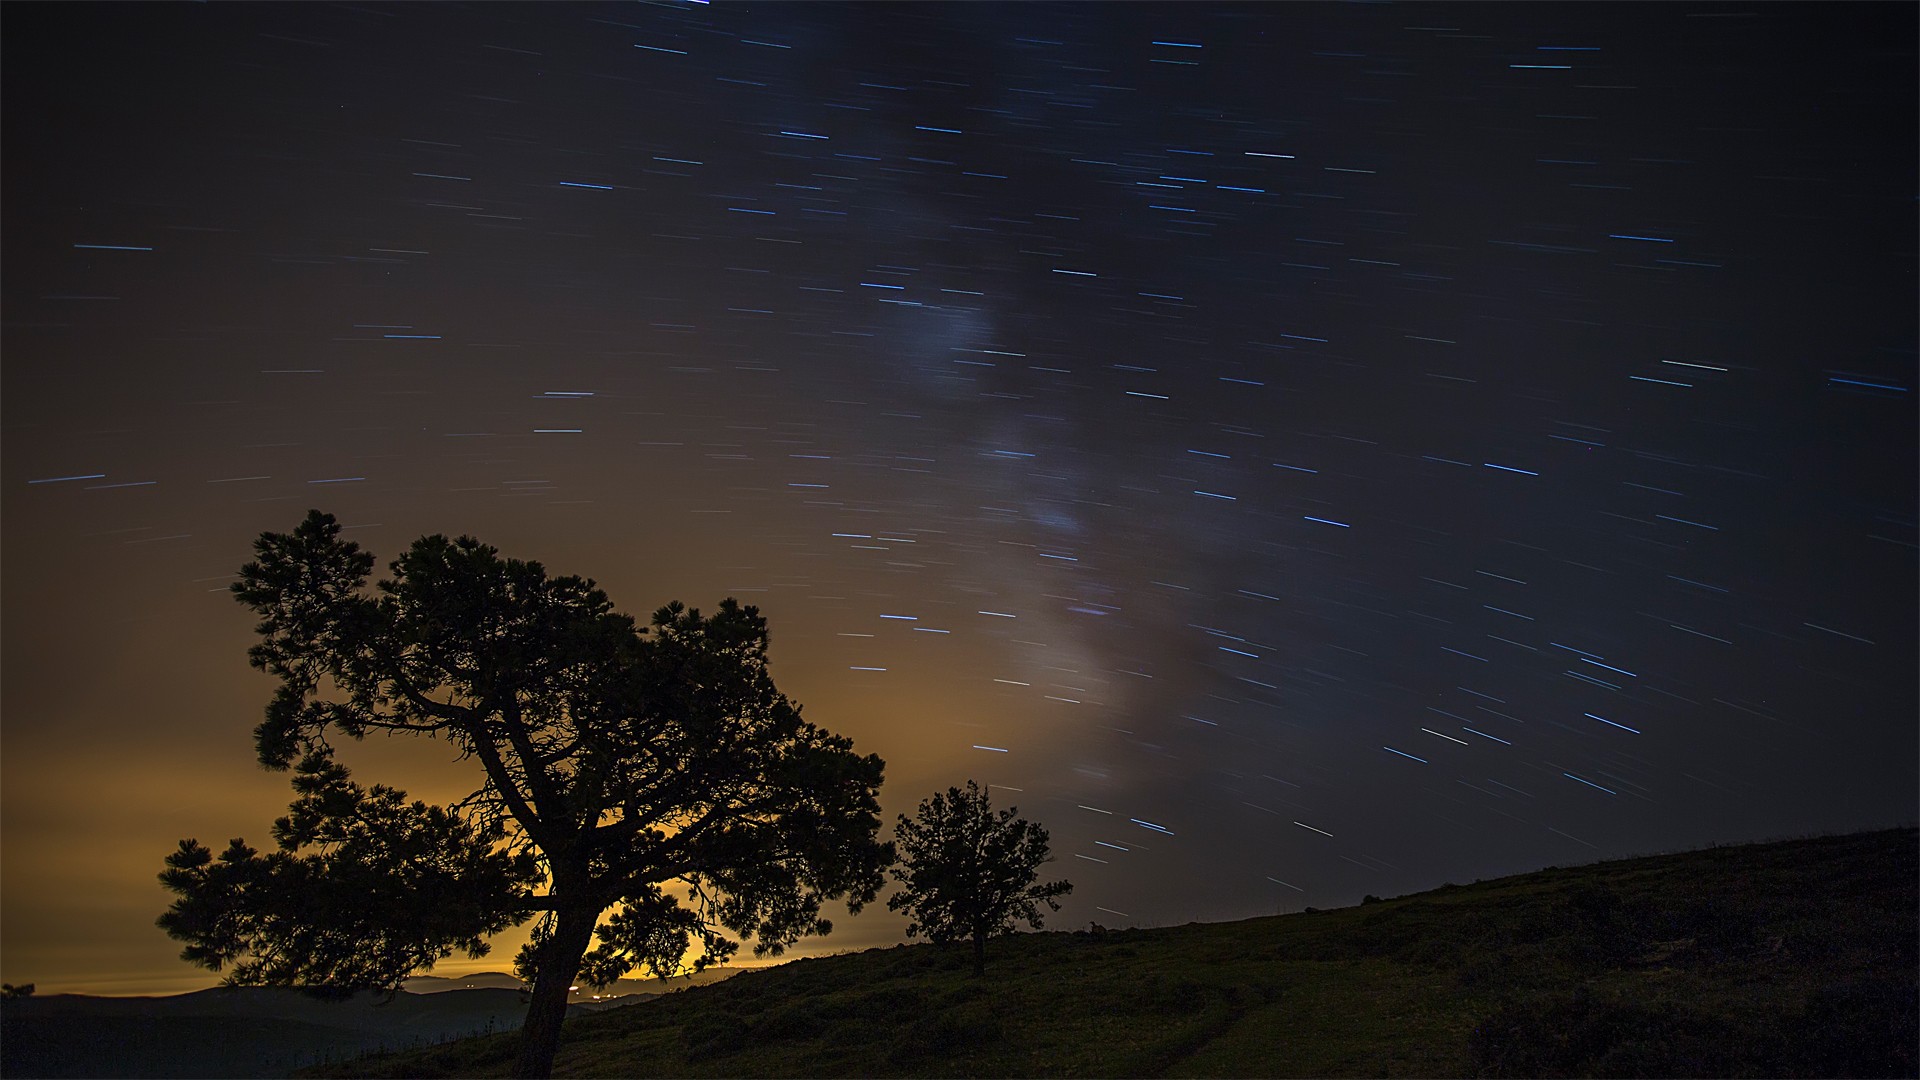 General 1920x1080 landscape long exposure night trees dark nature star trails sky outdoors